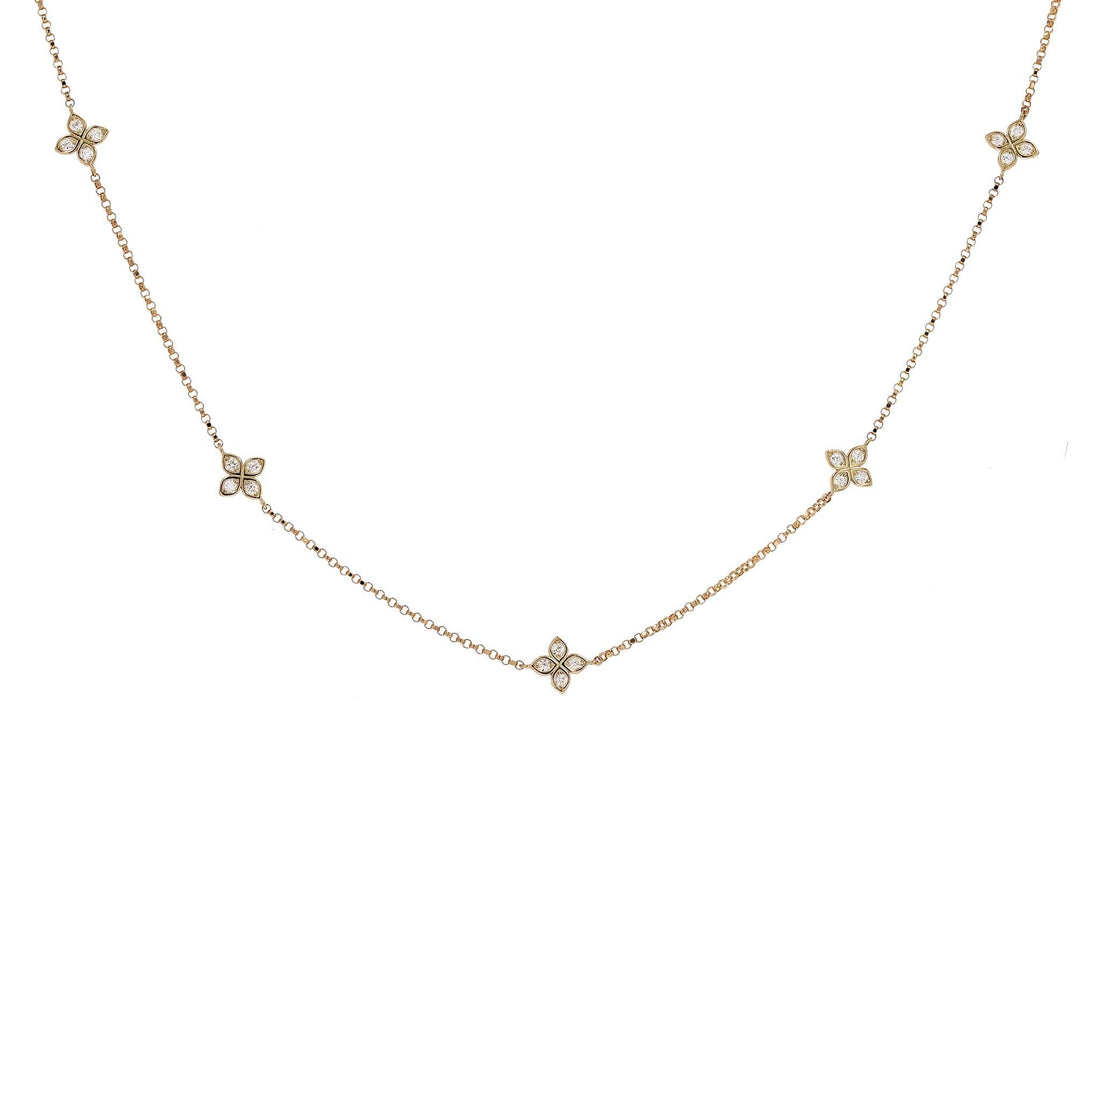 18k Yellow Gold Diamond Flower 5 Station Necklace by Roberto Coin - Skeie's Jewelers